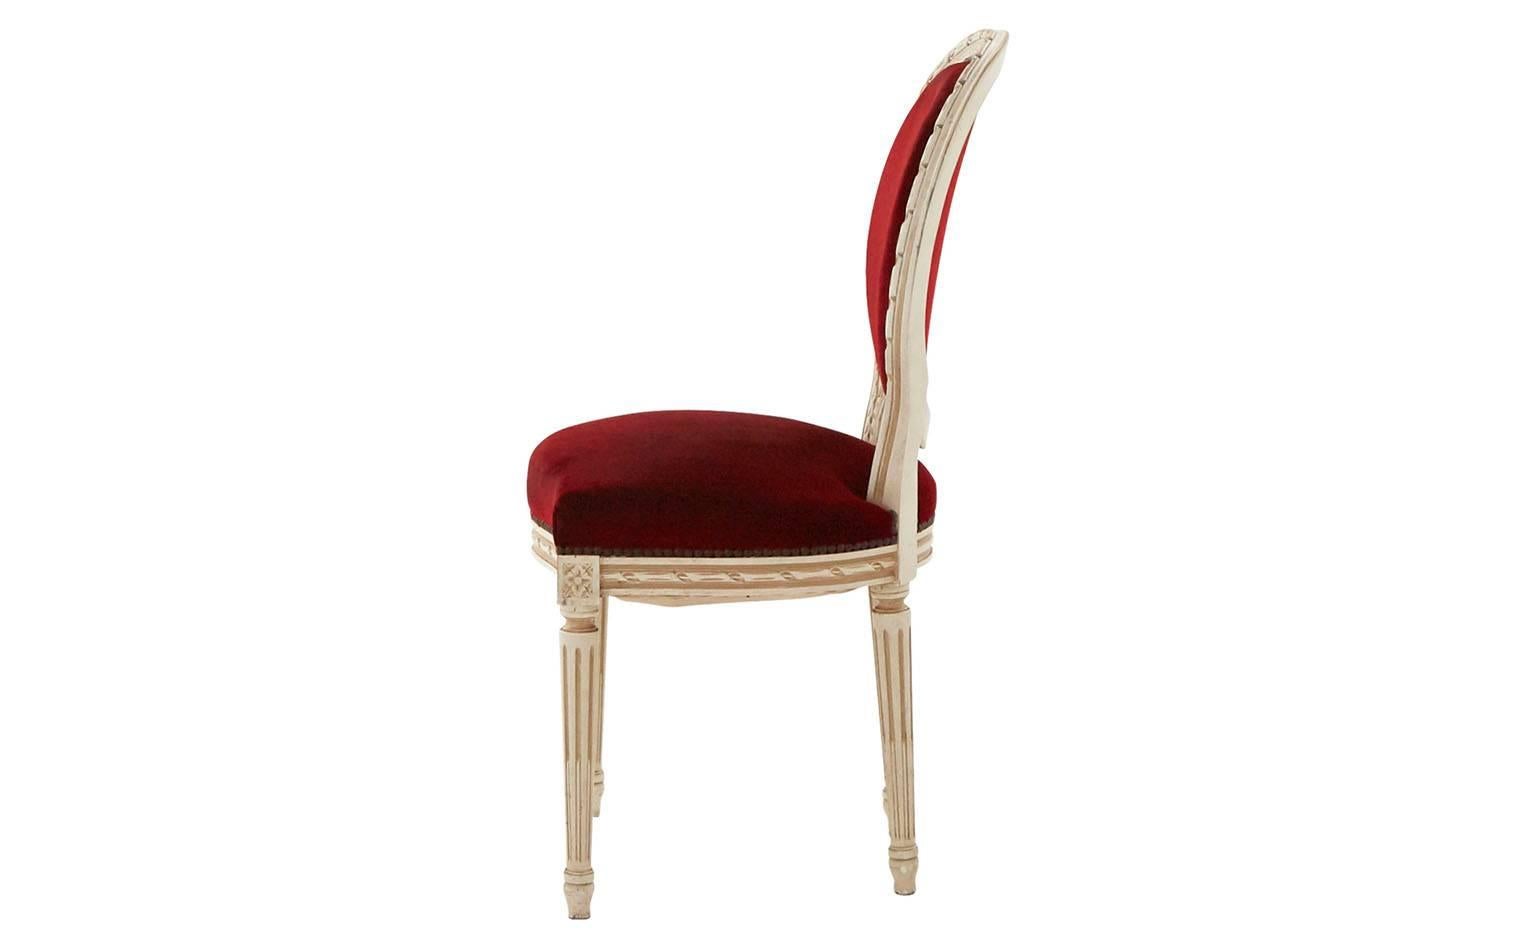 Side chair in the style of Louis XVI
Hand-painted ivory frame
Antiqued nailhead
Original merlot velvet
20th century
France

Dimensions:
Overall 20'W x 18'D x 37.5'H
Seat height 19.5'H